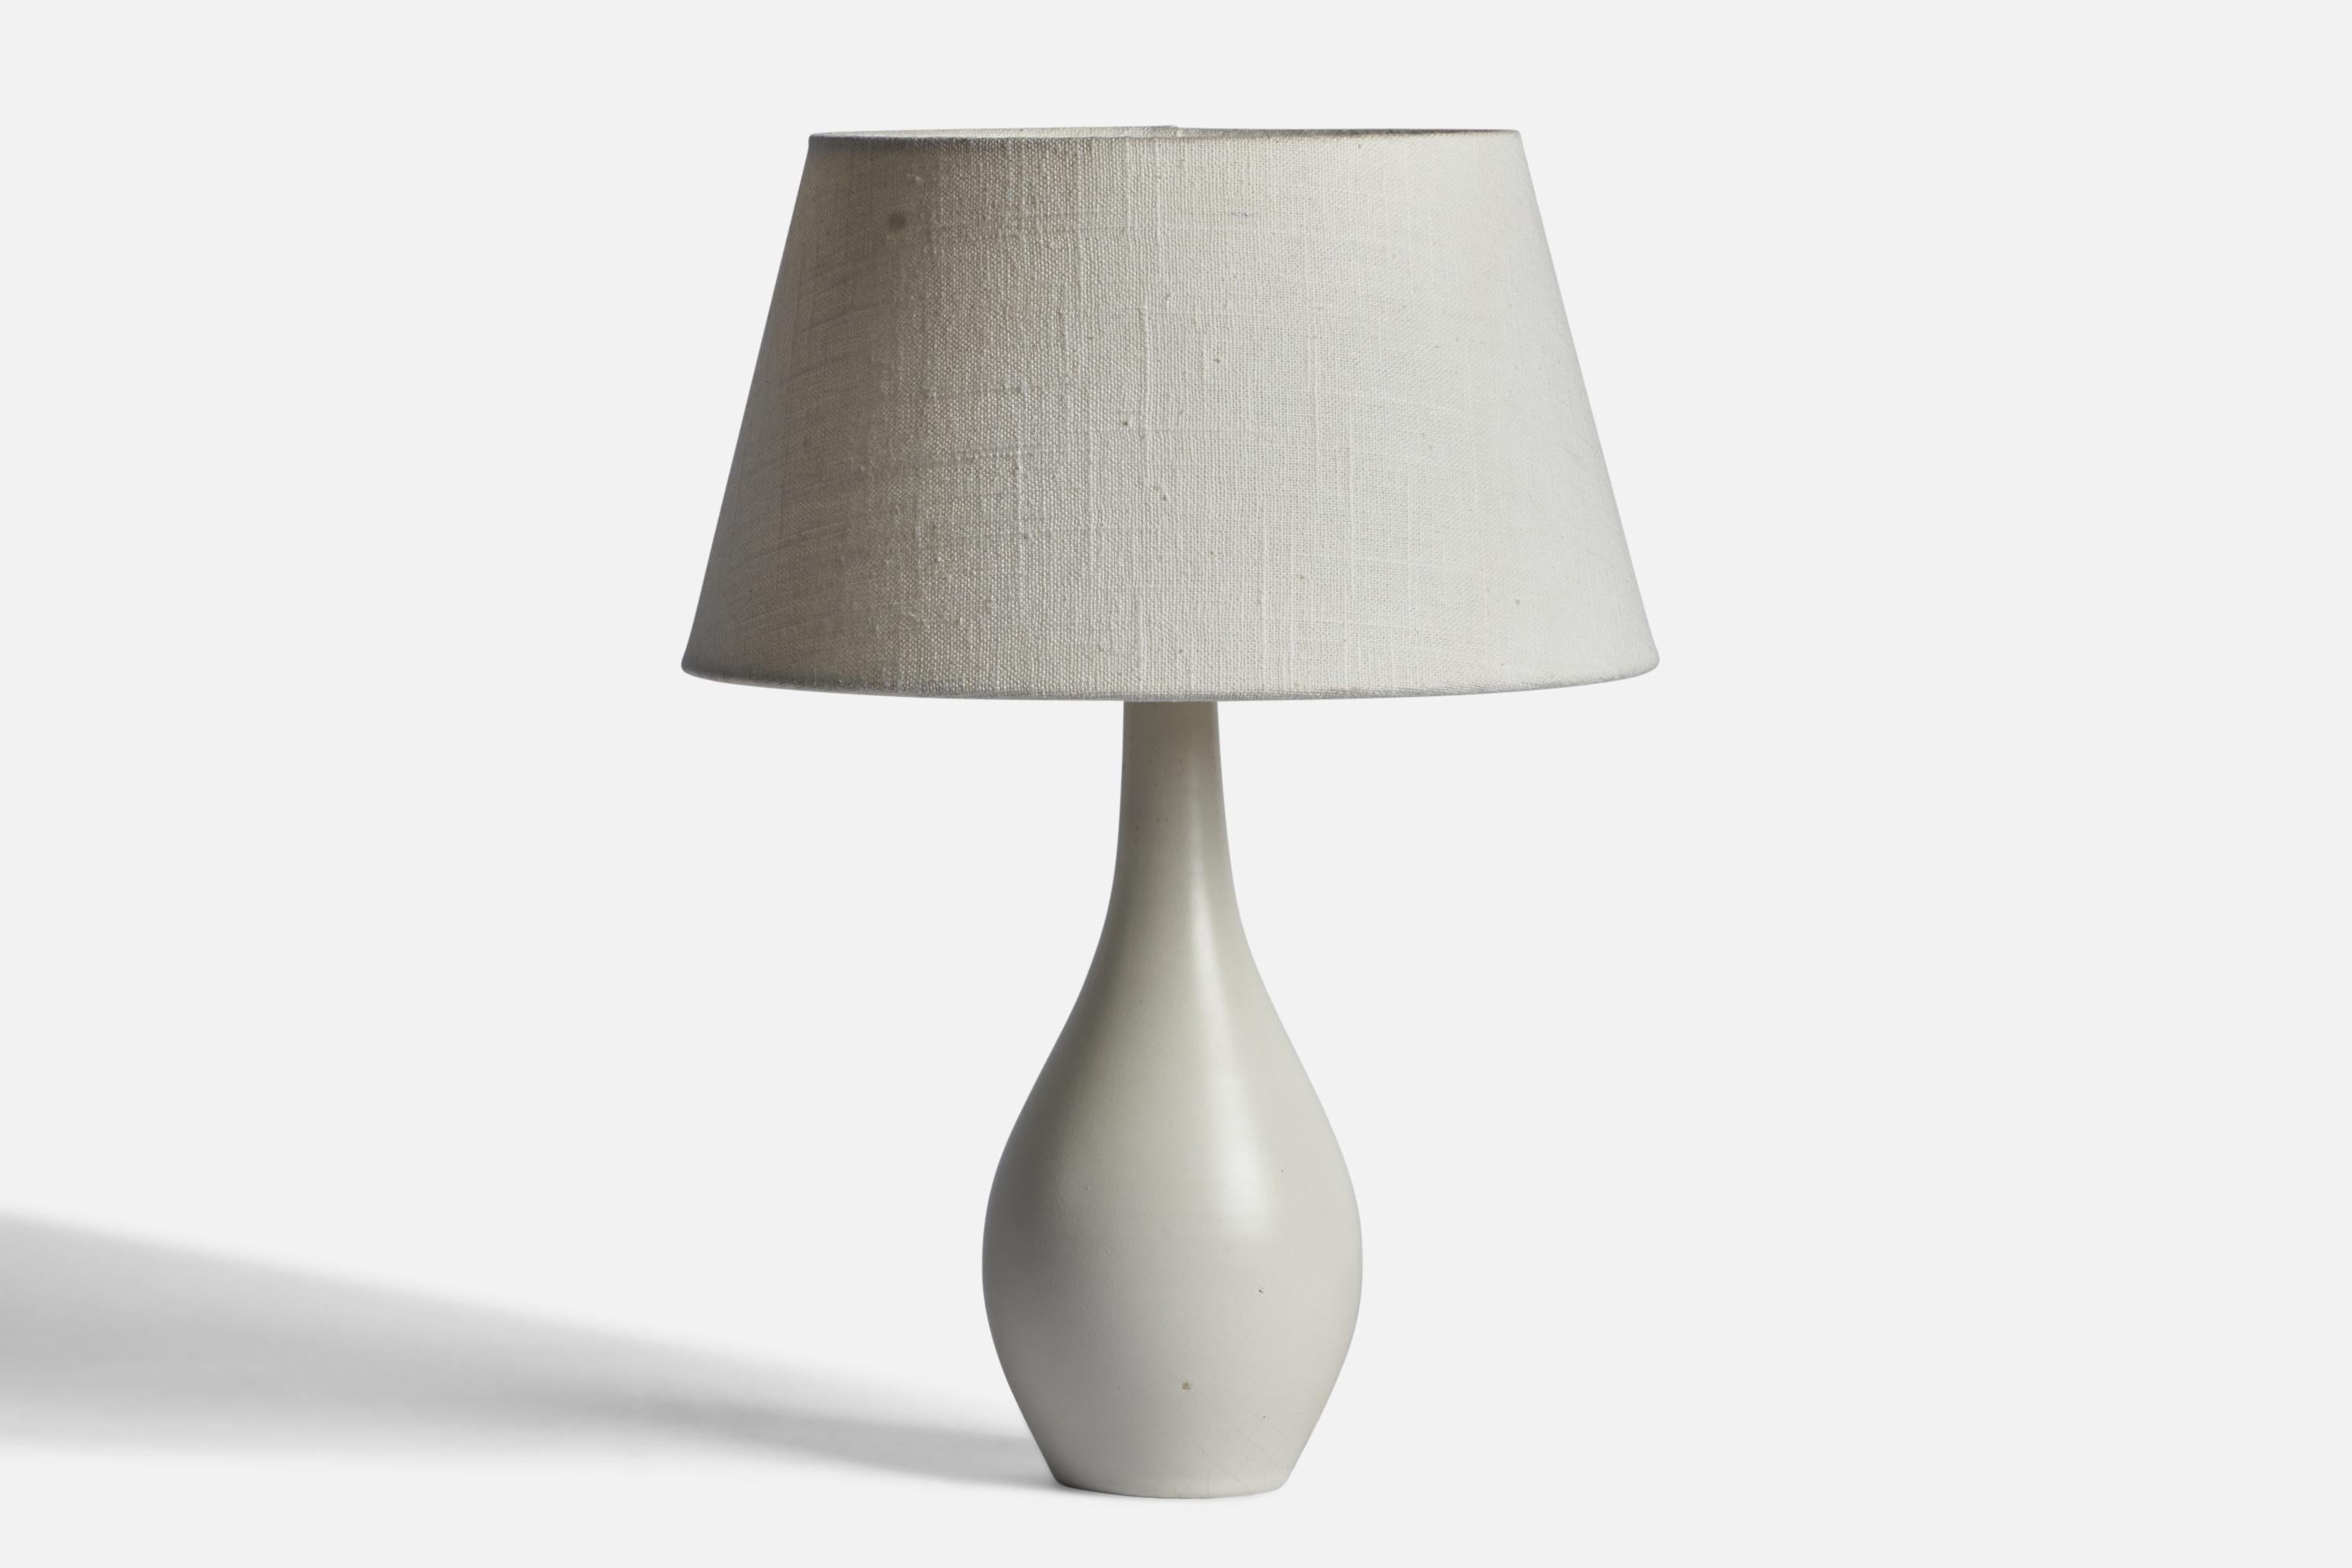 An off-white-glazed earthenware table lamp designed and produced in Sweden, 1940s.

Dimensions of Lamp (inches): 11” H x 3.95” Diameter
Dimensions of Shade (inches): 7” Top Diameter x 10” Bottom Diameter x 5.5” H 
Dimensions of Lamp with Shade